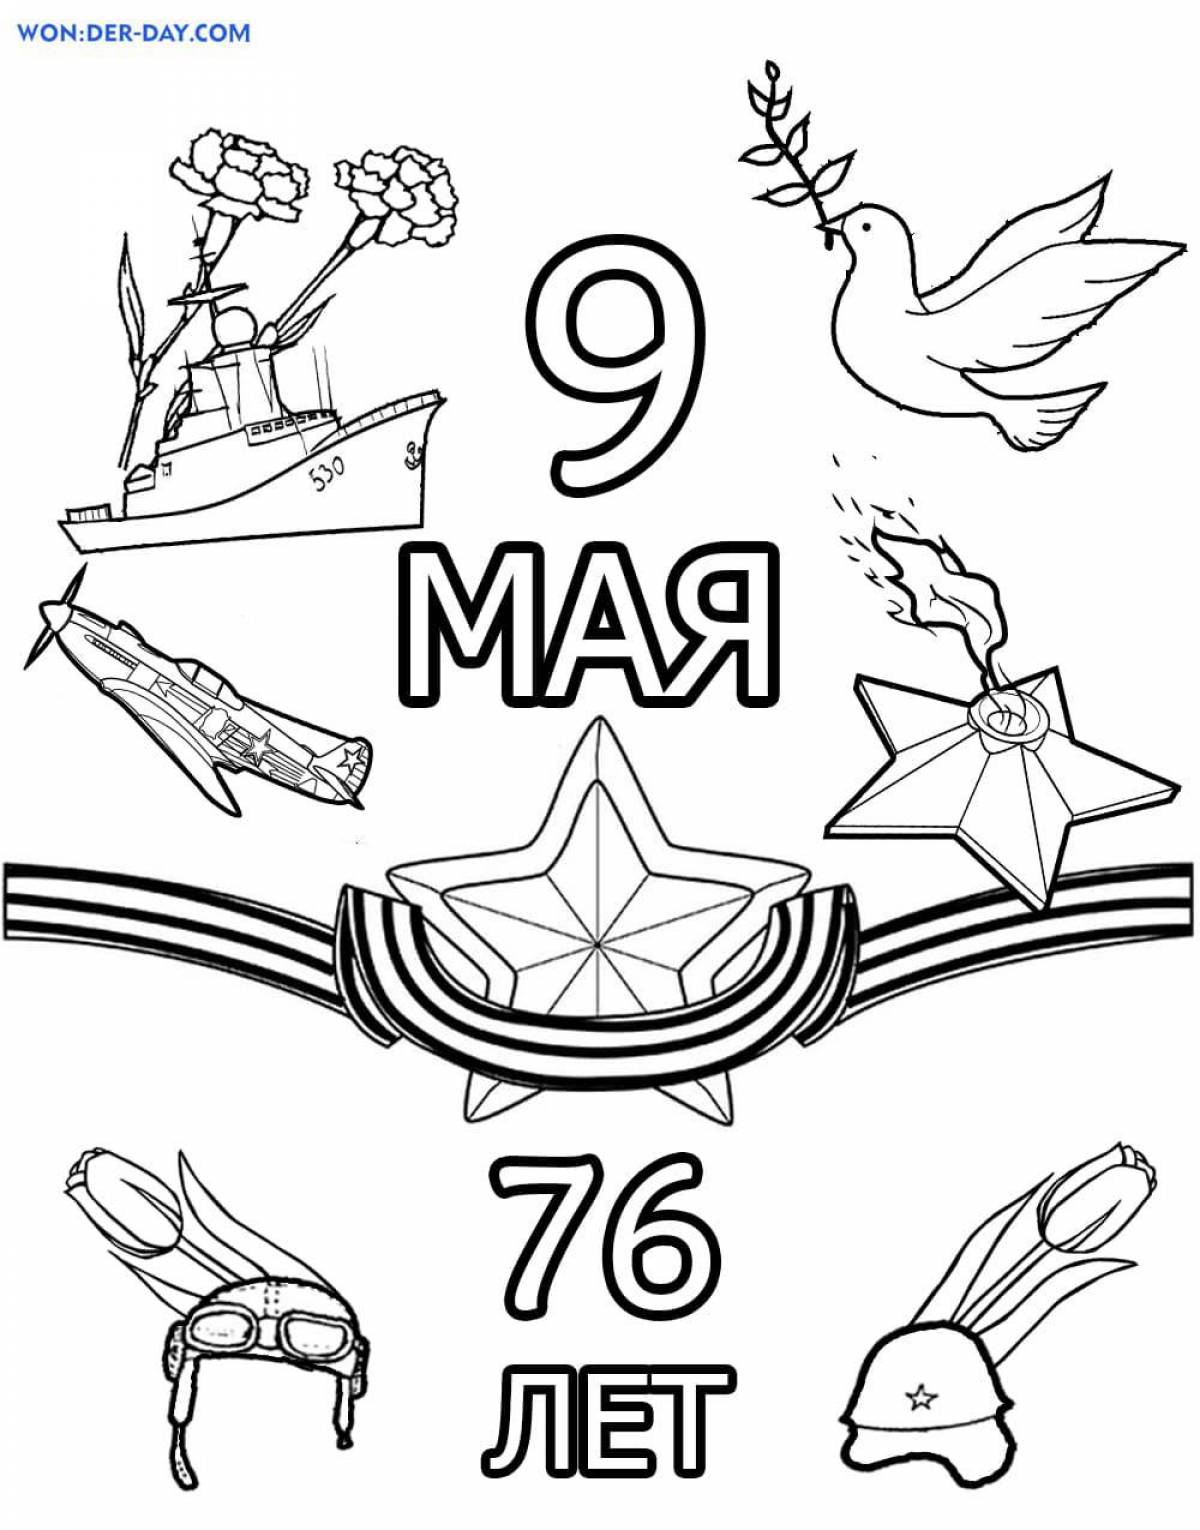 Colorific May 9th coloring page